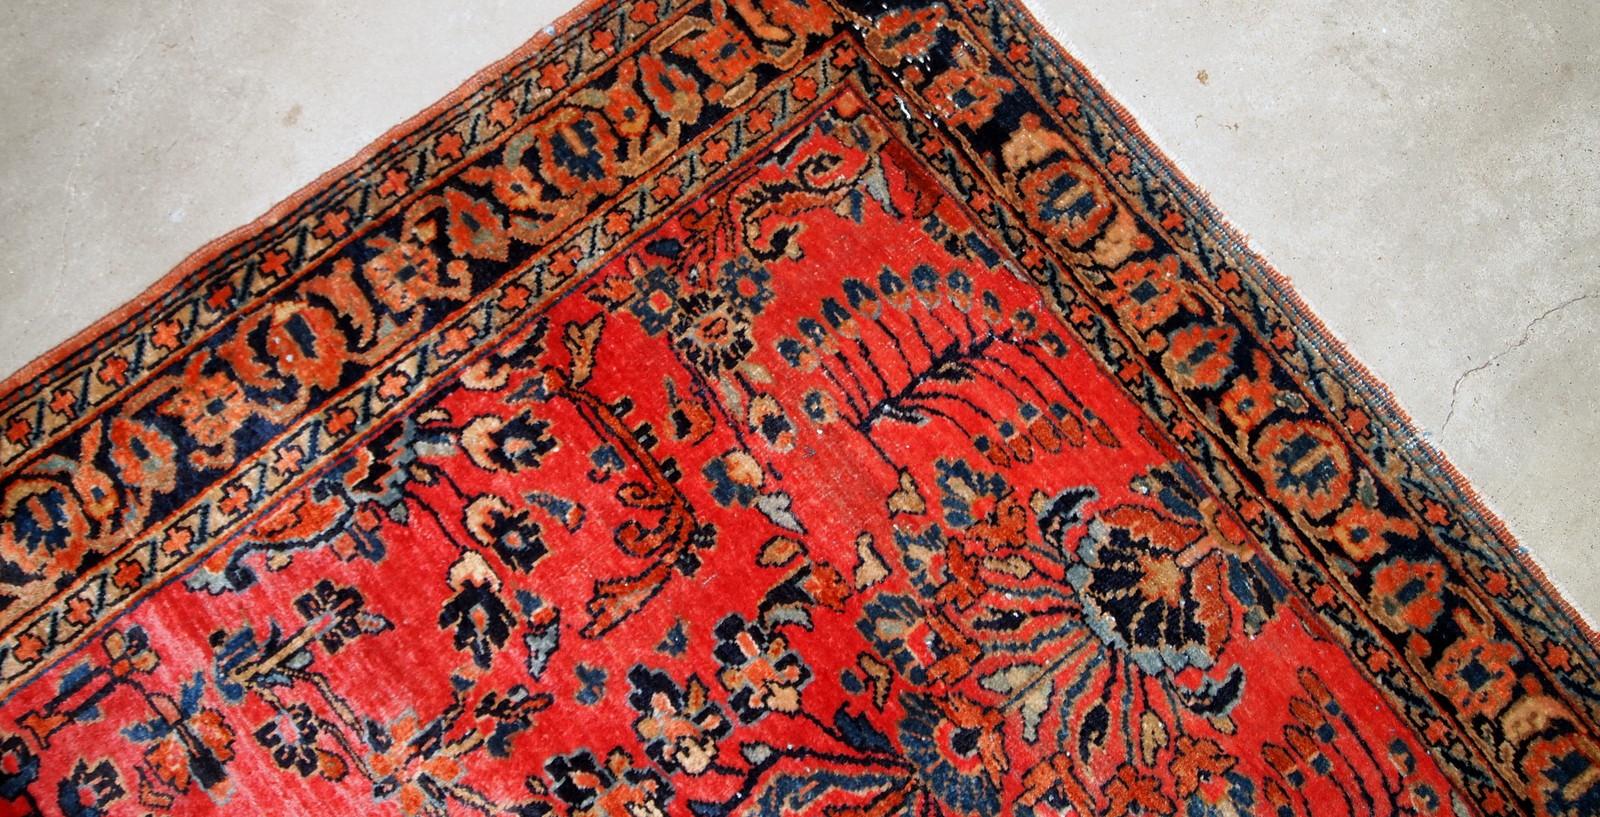 Handmade antique Sarouk style rug in original condition, it has some signs of age. The rug is from the beginning of 20th century made in red wool.

- Condition: Original, some signs of age,

- circa 1920s,

- Size: 3.2' x 5.3' (97cm x